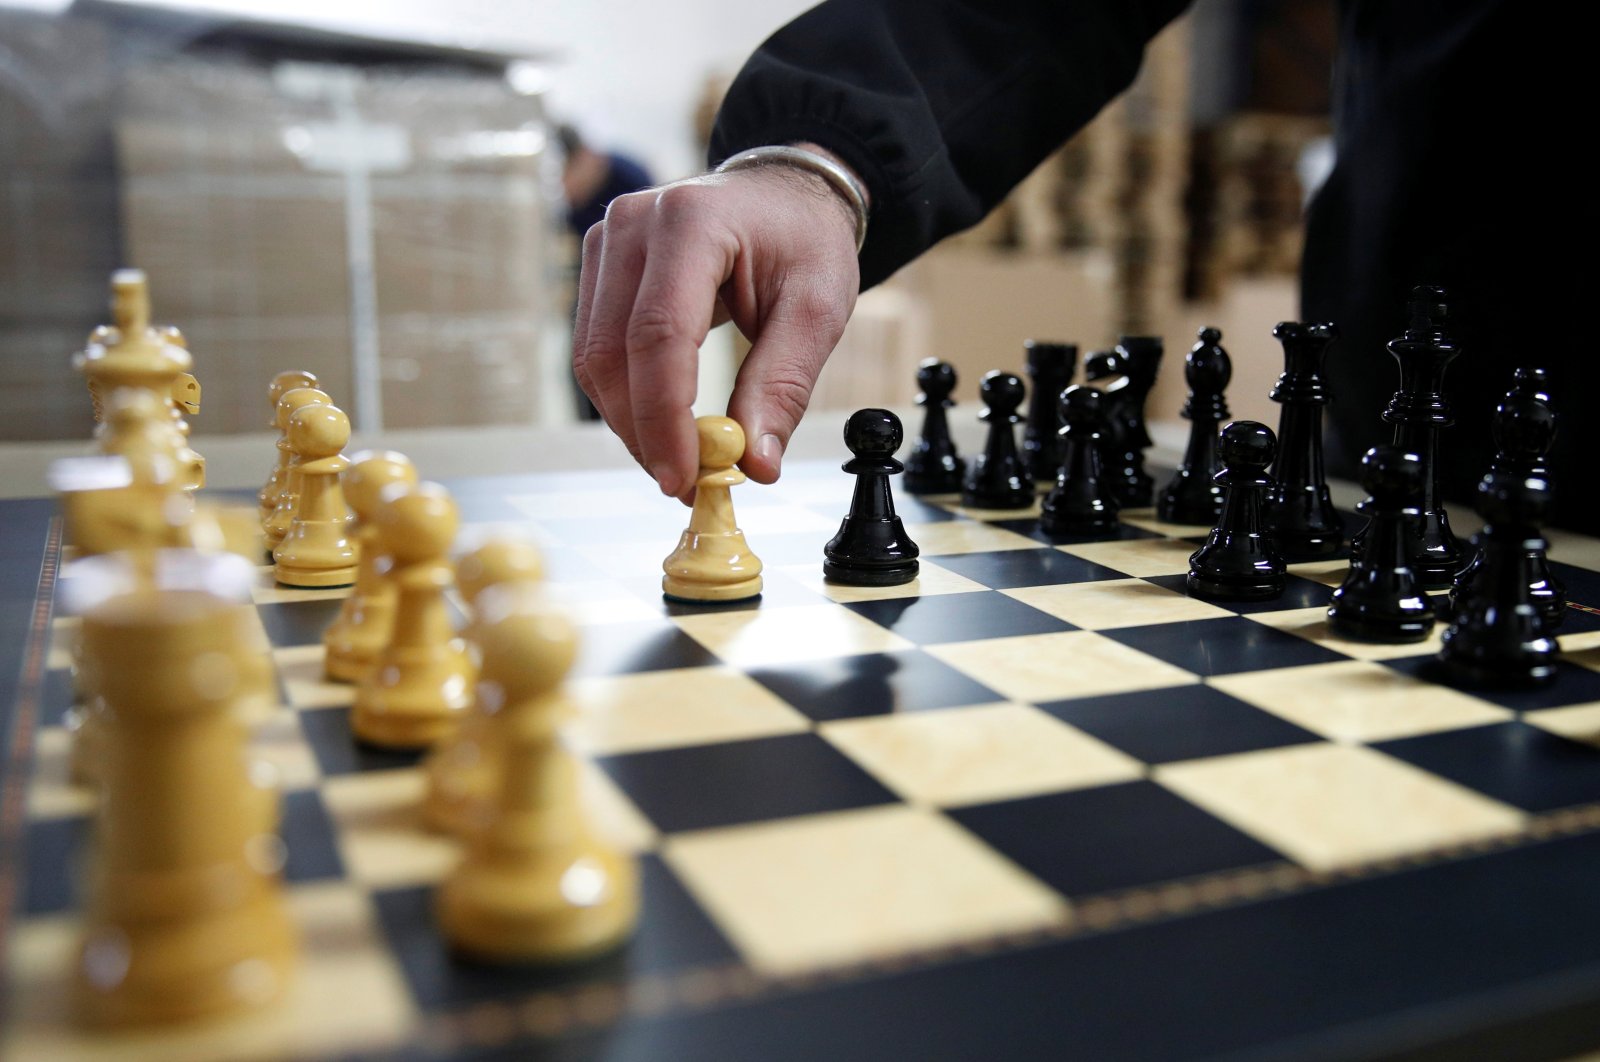 David Ferrer, Spanish chess board maker, moves a chess pawn on a chessboard at the Rechapados Ferrer factory in La Garriga, north of Barcelona, Spain, Feb. 11, 2021. (Reuters Photo)